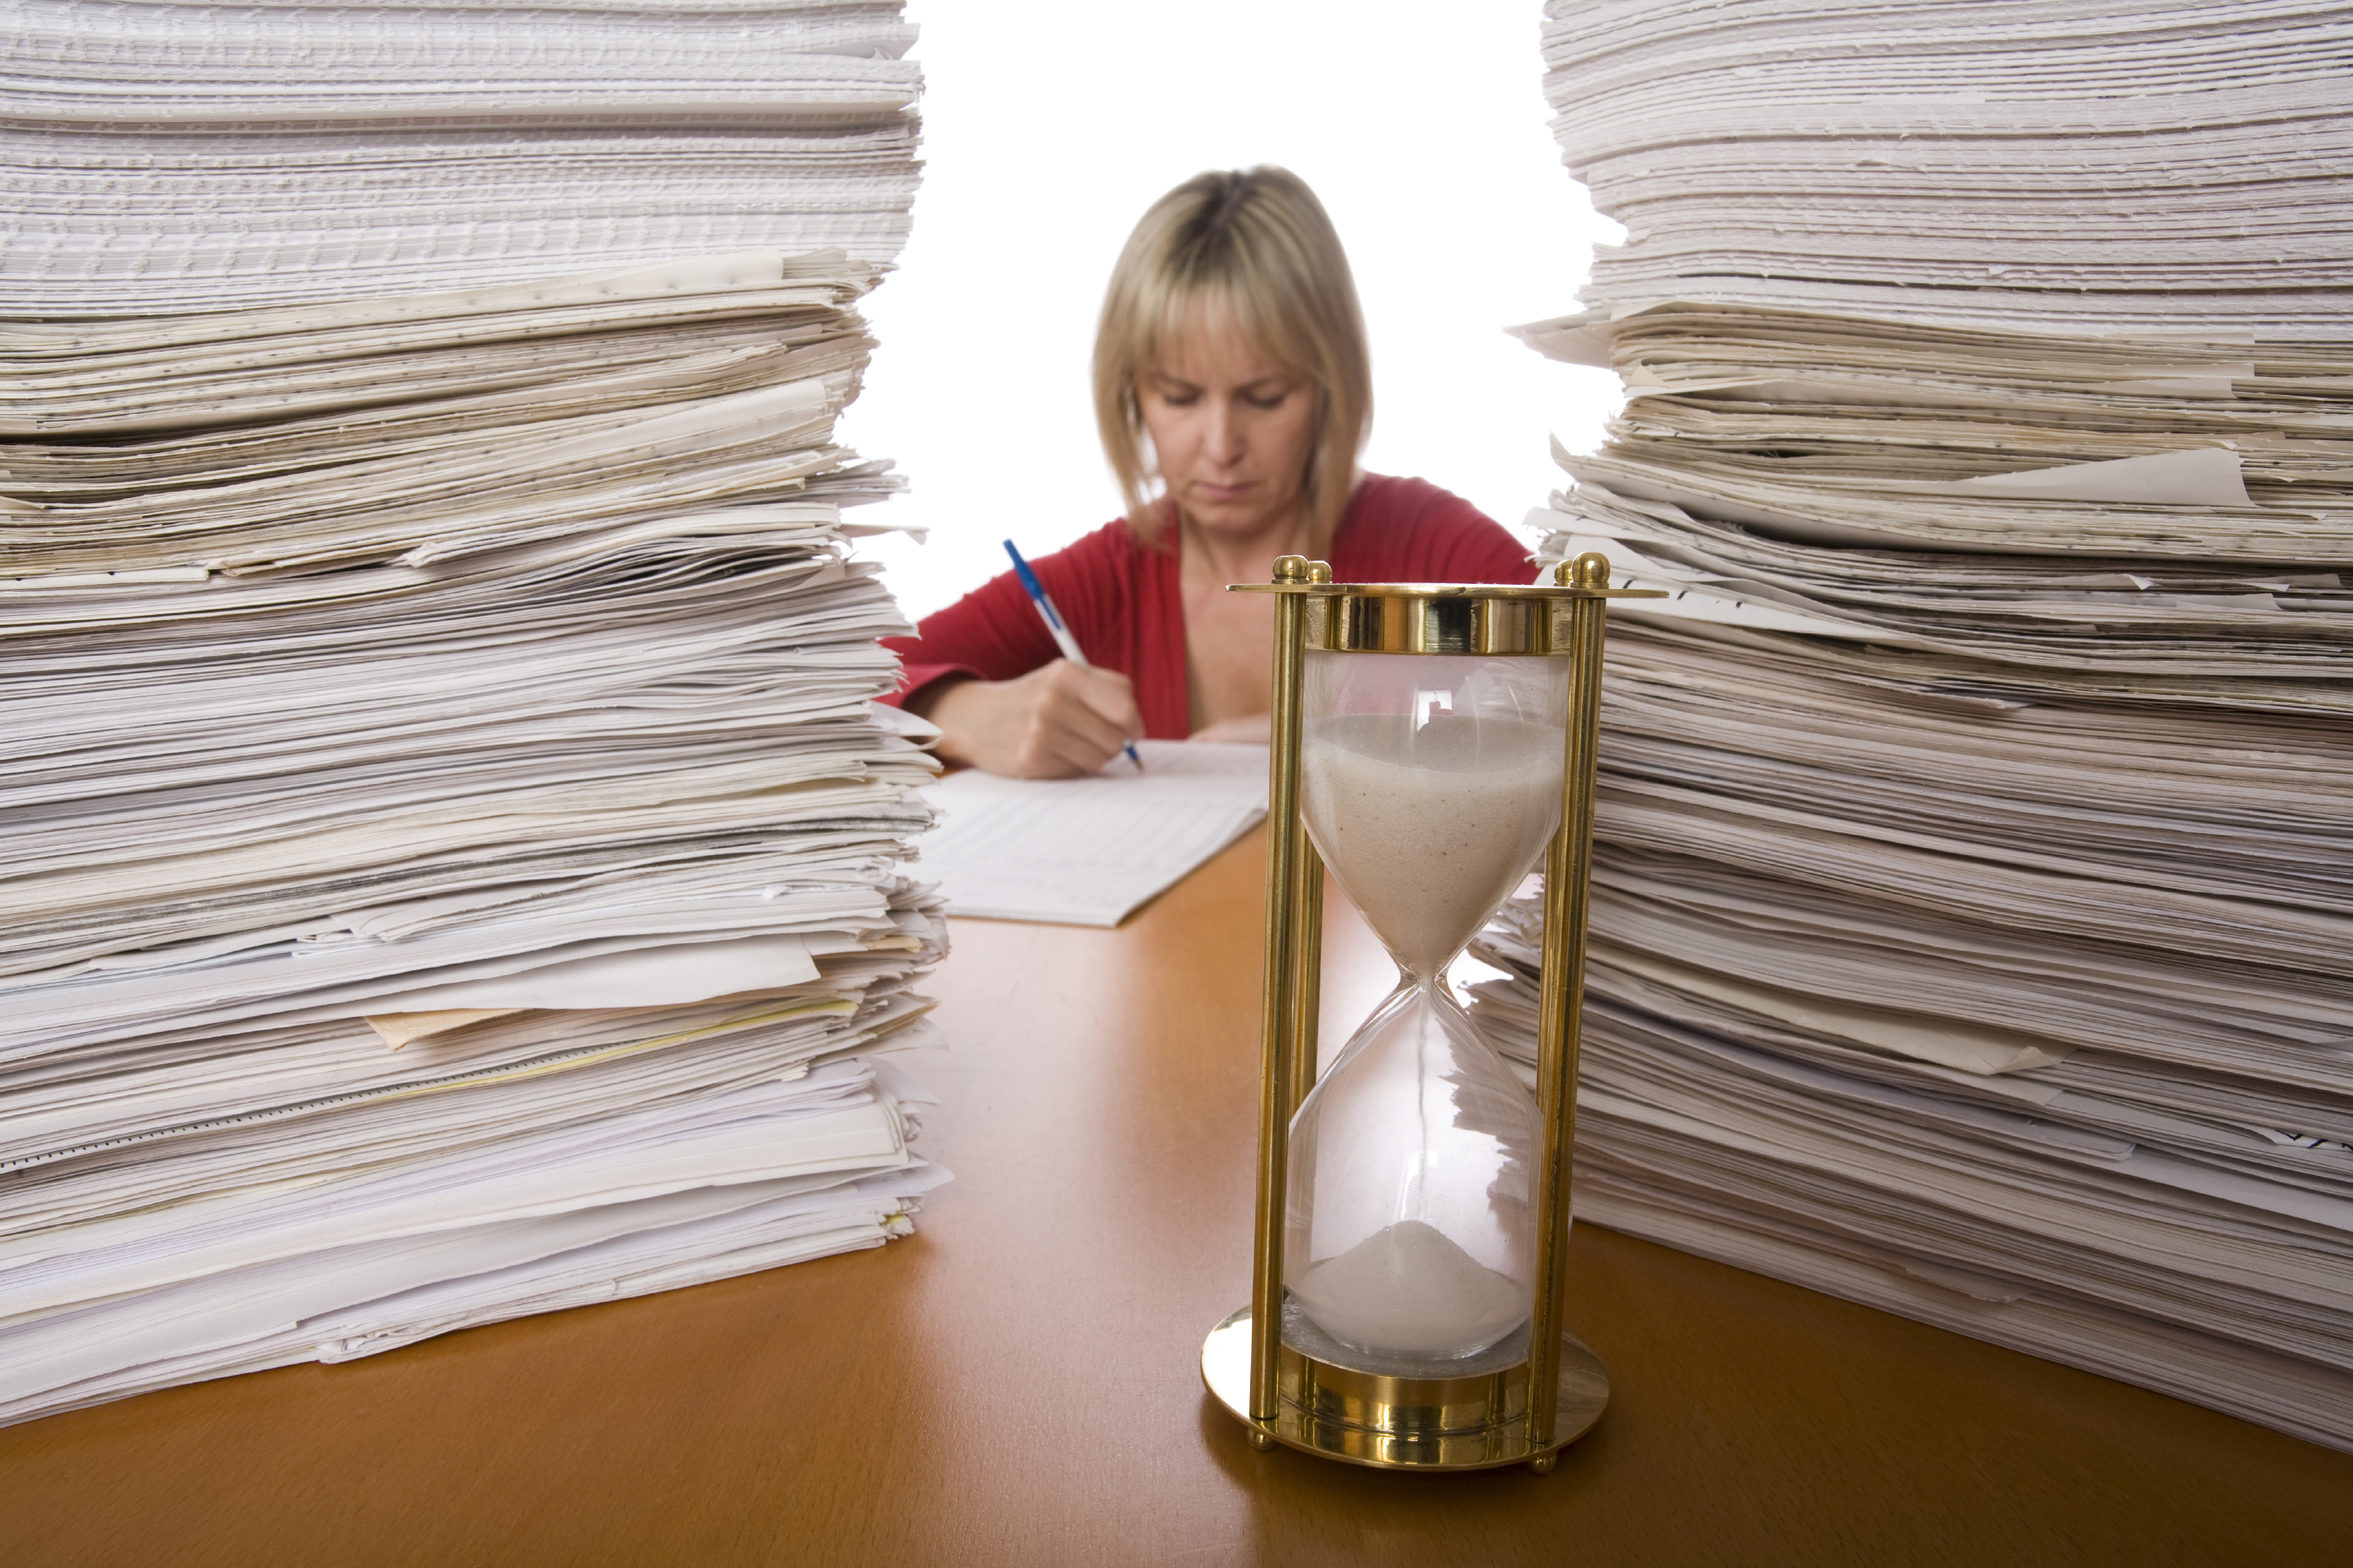 Woman-with-piles-of-paper-and-hourglass.jpg